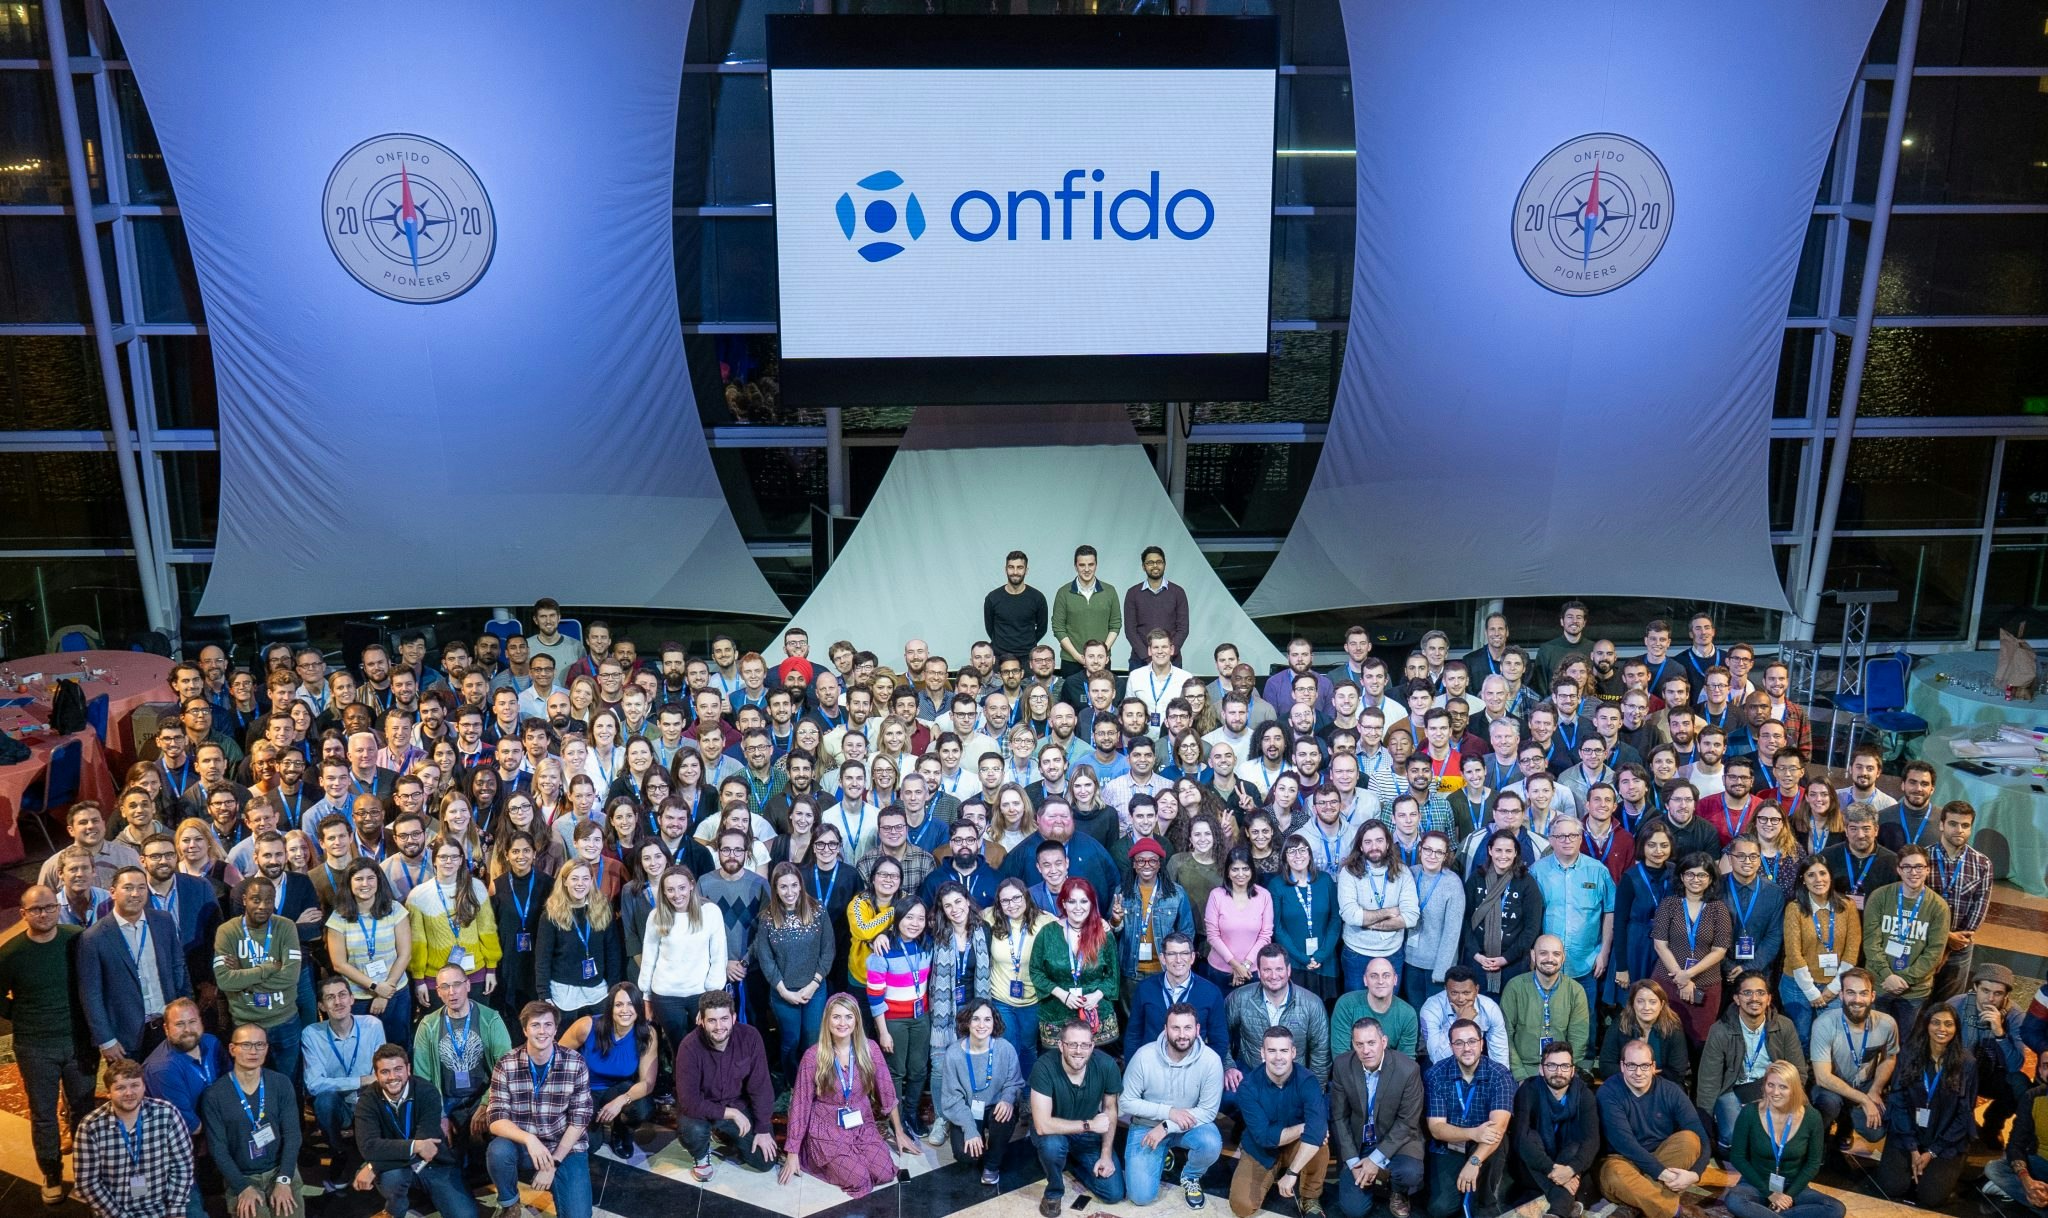 A group photo of Onfido employees at a conference